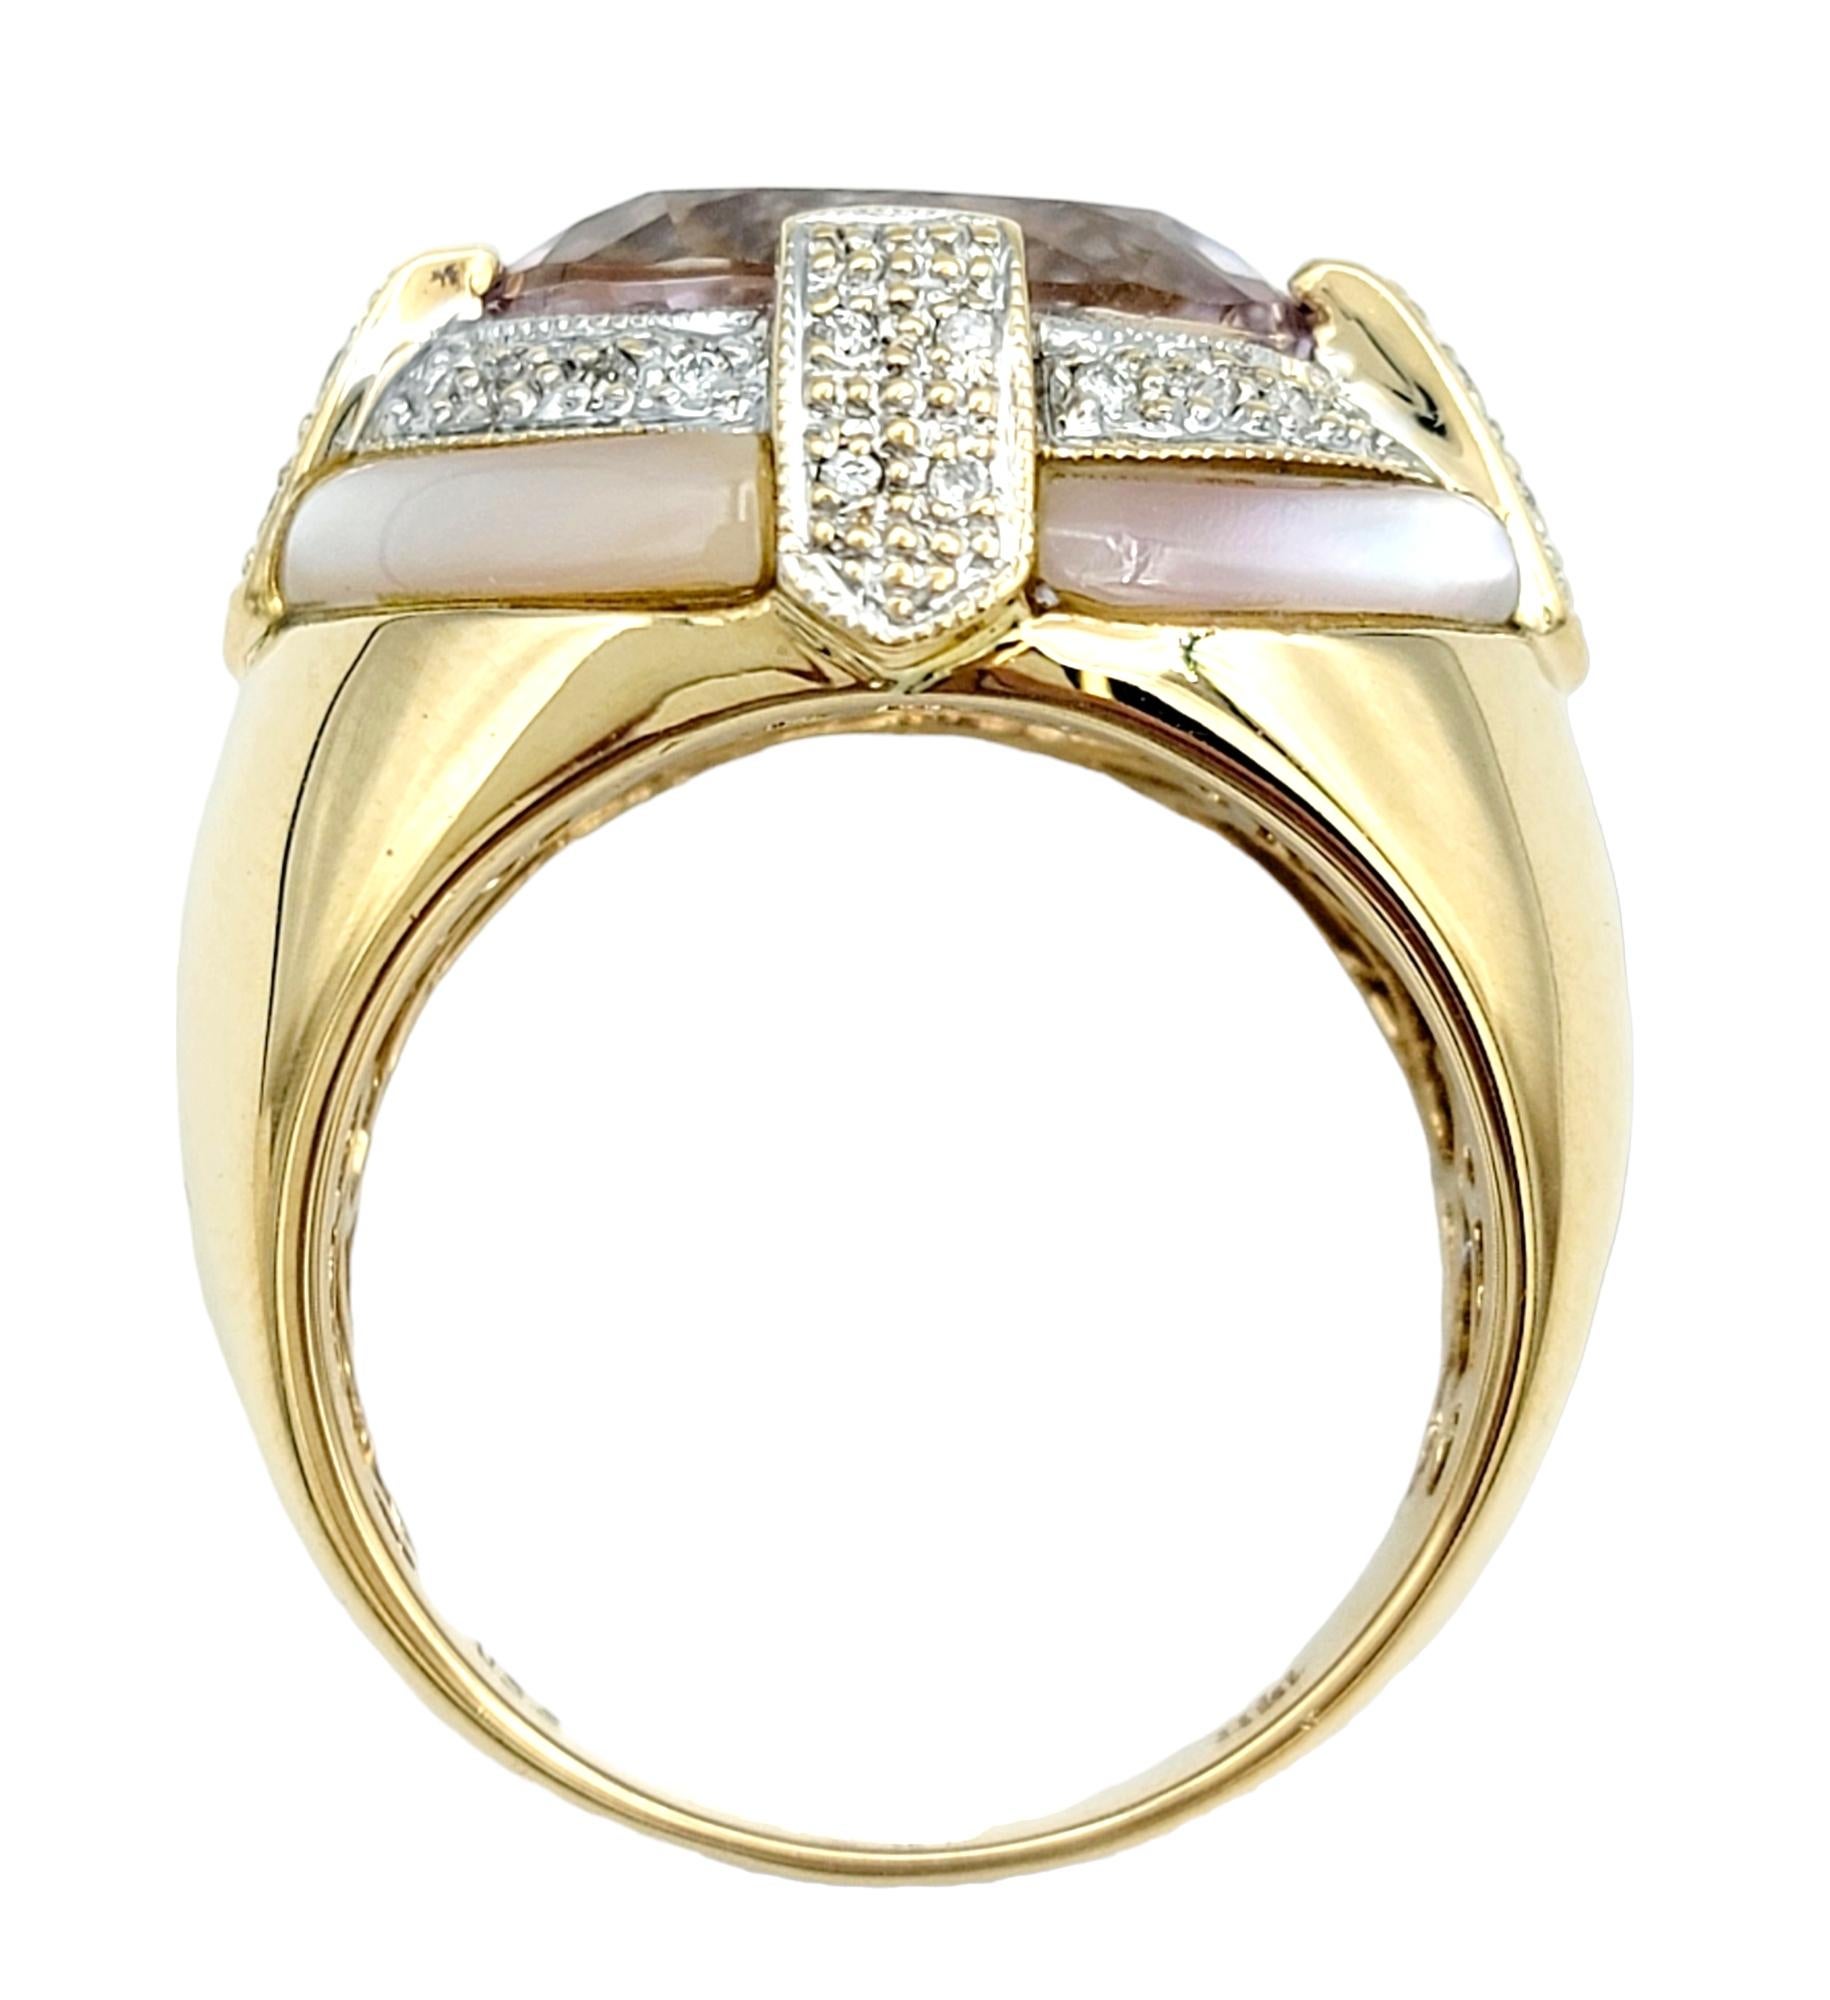 Oval Cut Kunzite, Diamond, and Mother of Pearl Cocktail Ring in 14 Karat Gold For Sale 1